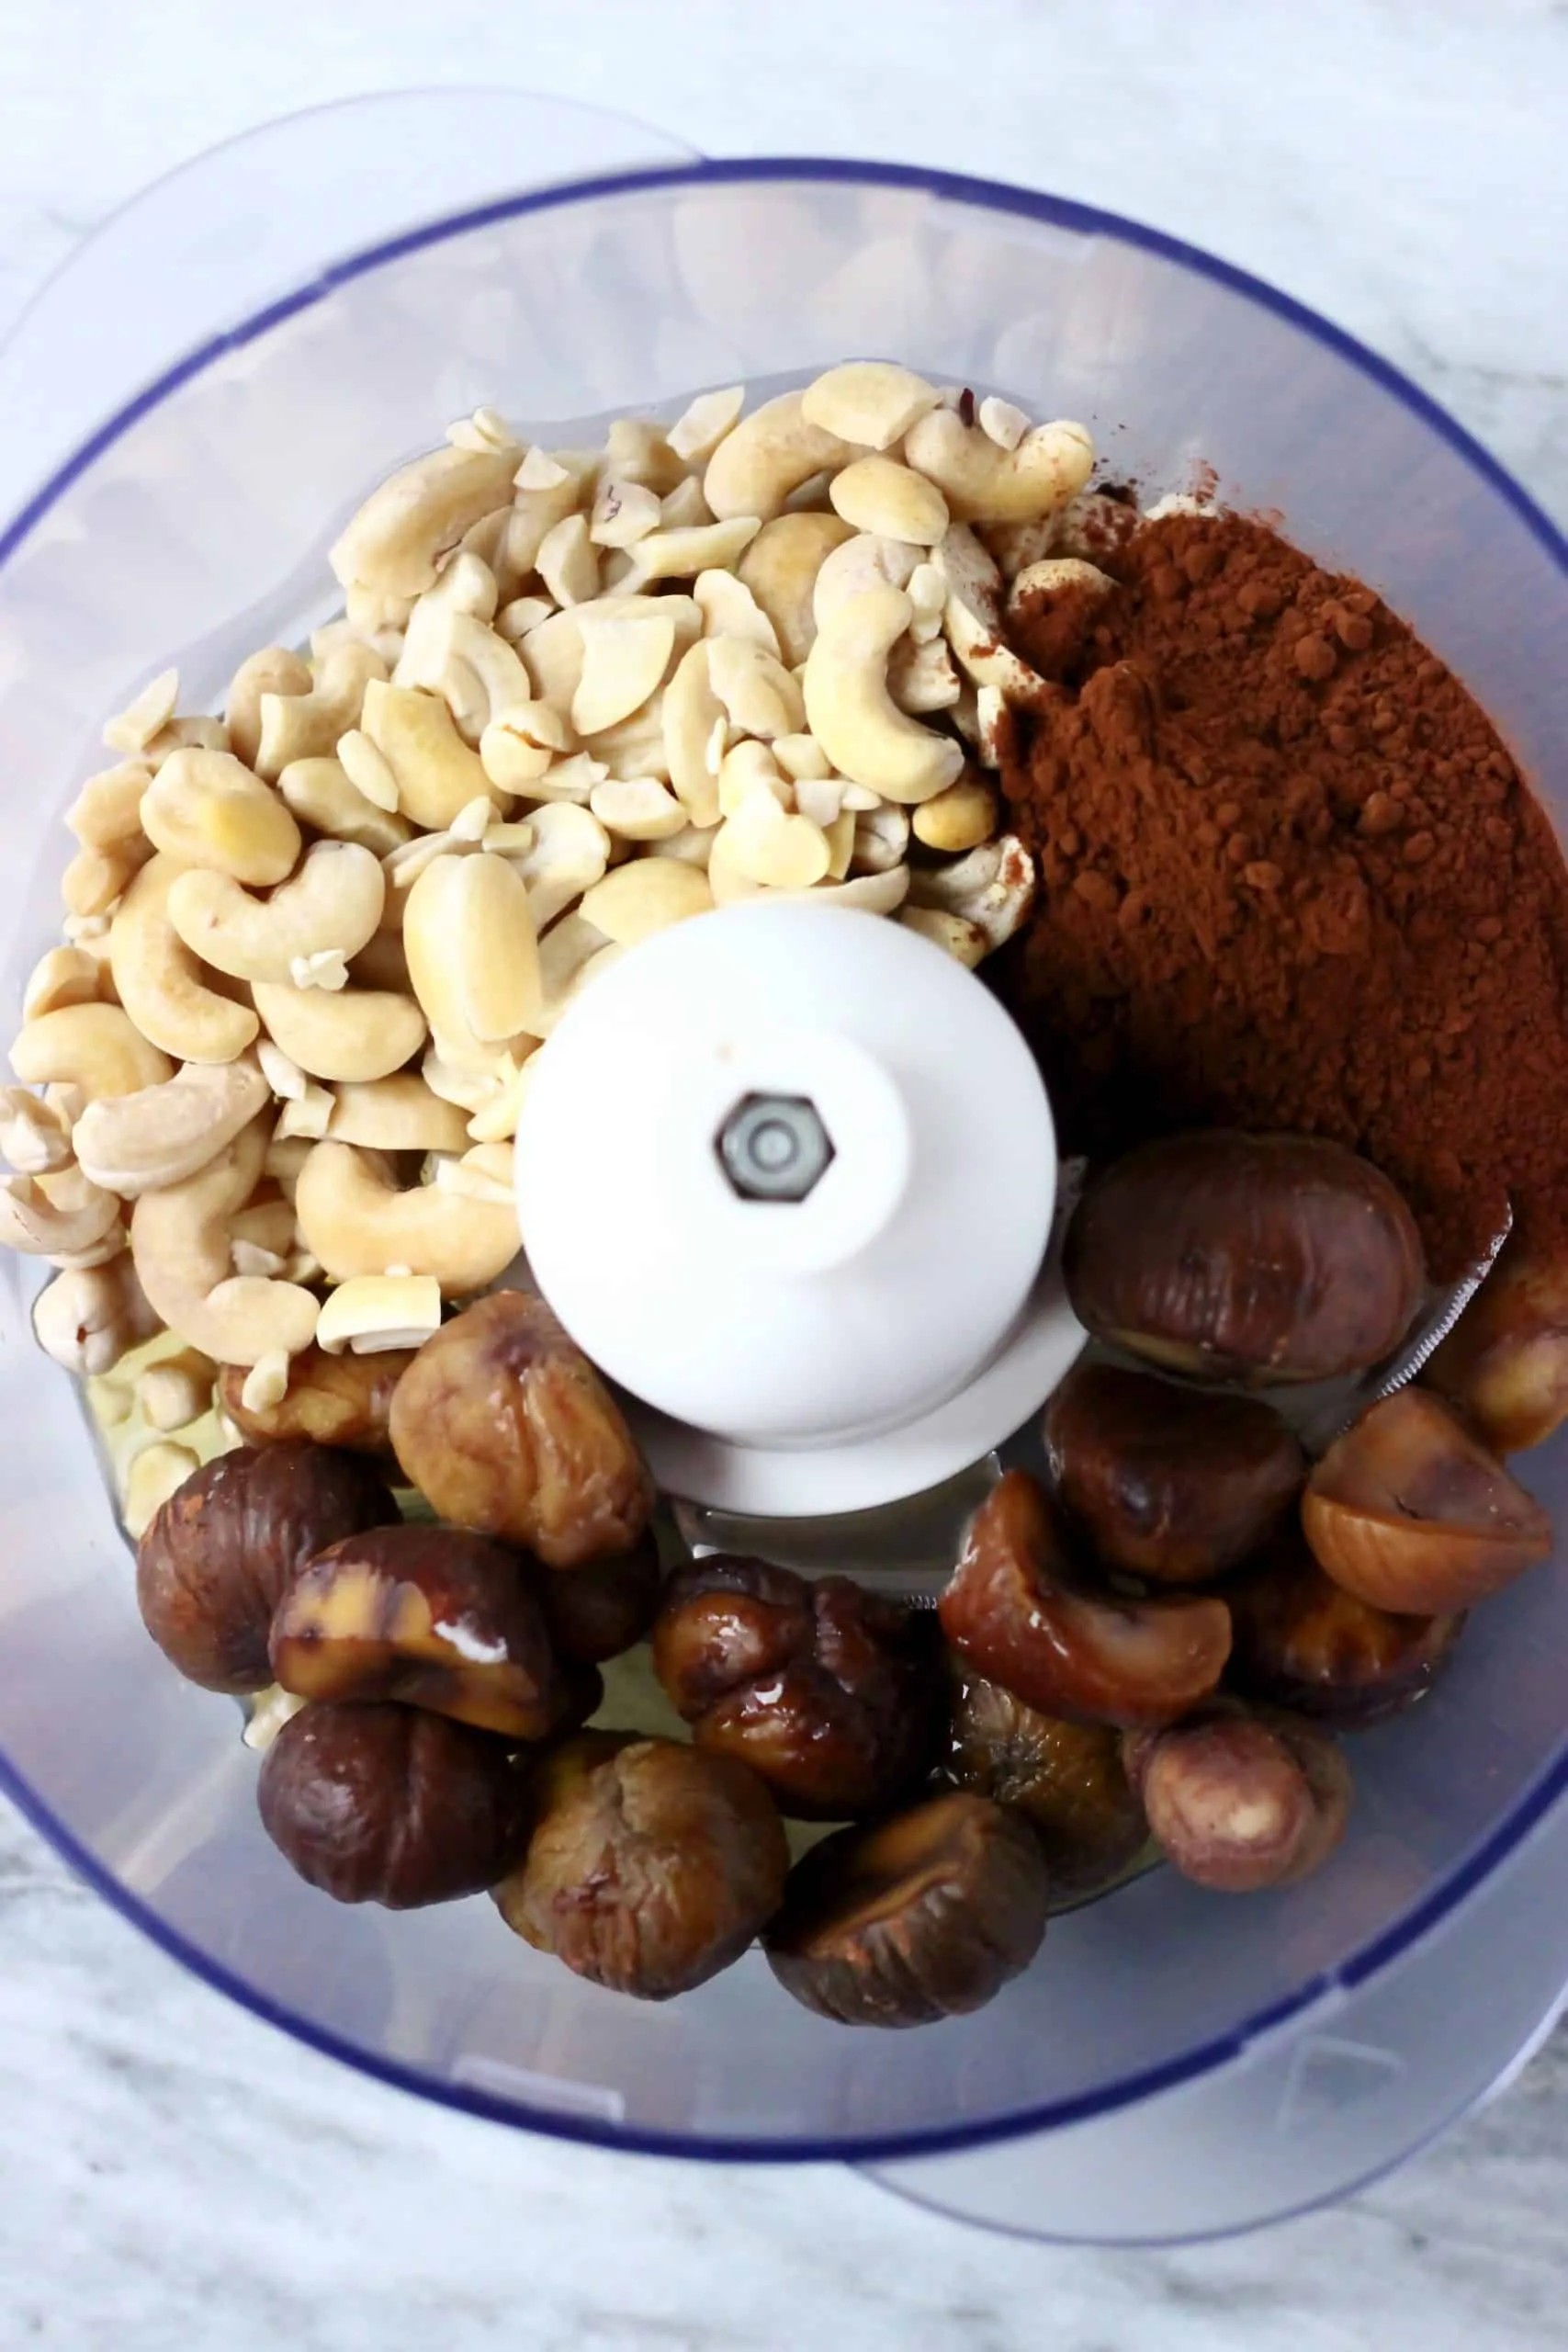 Cashews, cocoa powder and chestnuts in a food processor